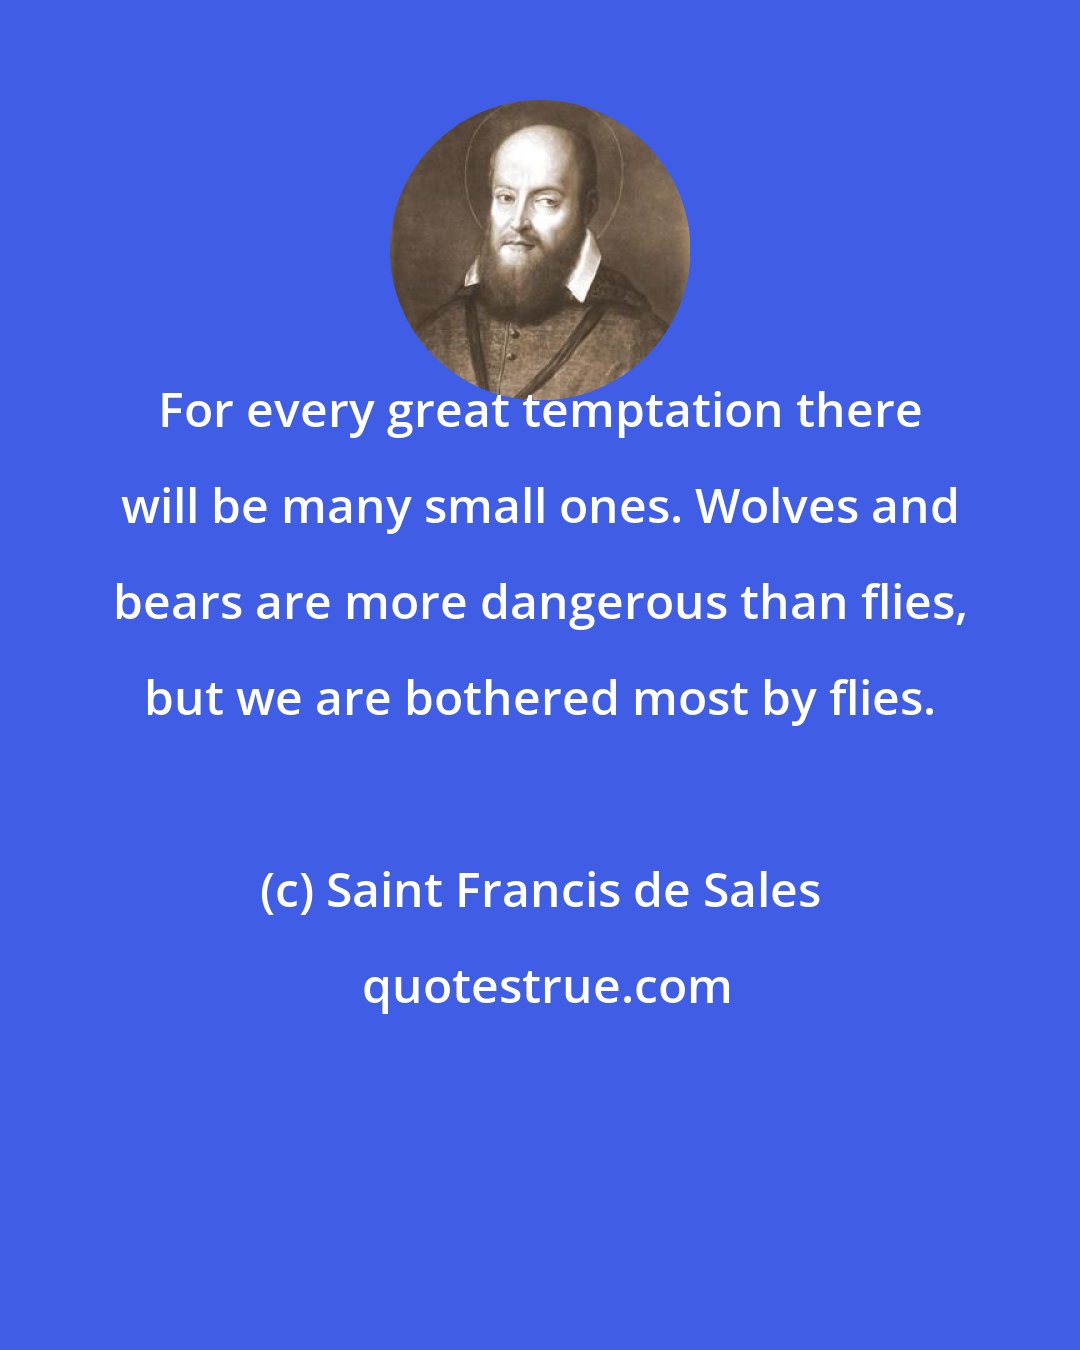 Saint Francis de Sales: For every great temptation there will be many small ones. Wolves and bears are more dangerous than flies, but we are bothered most by flies.